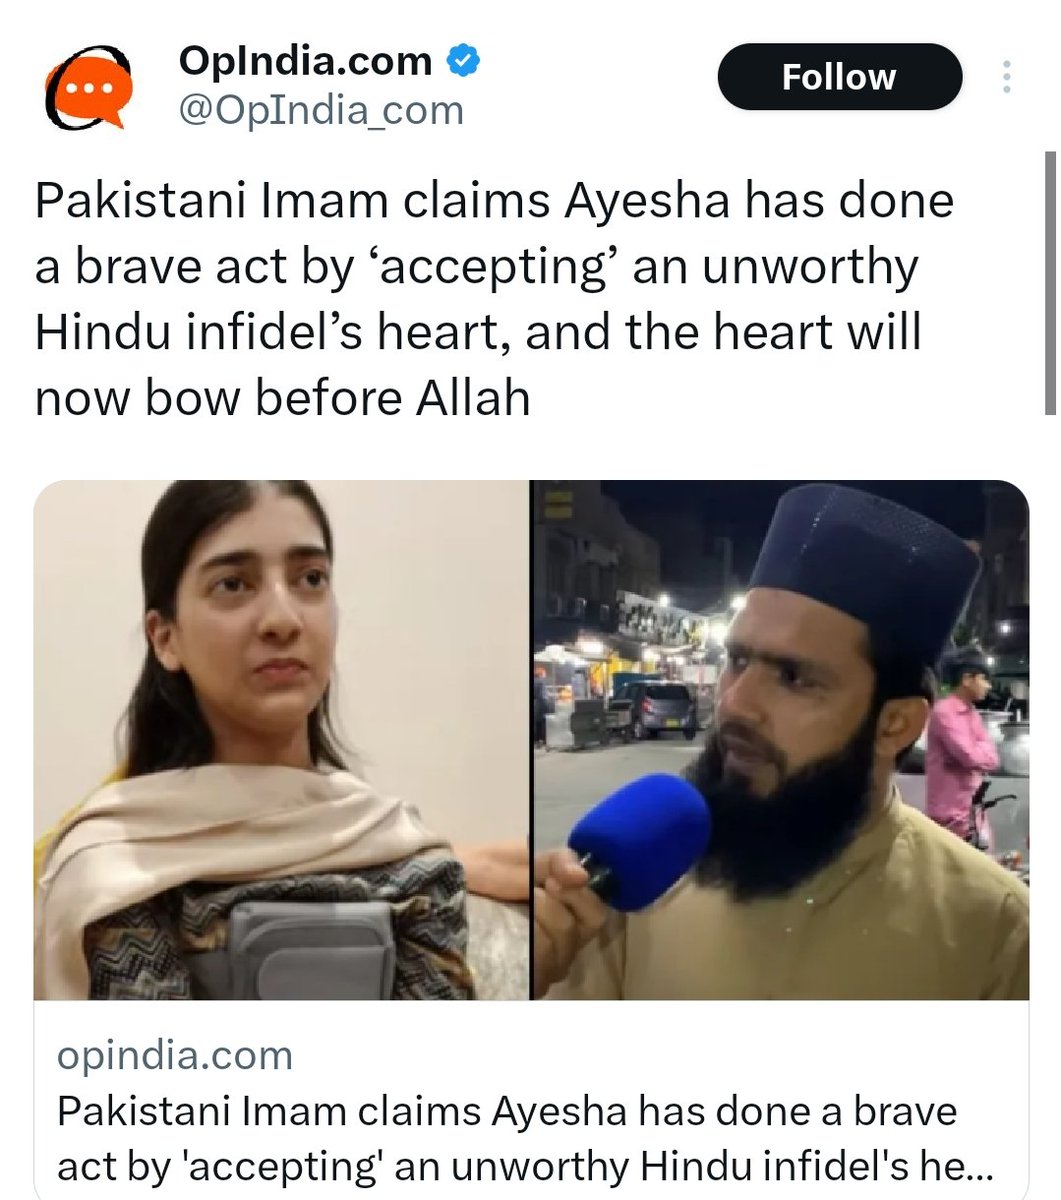 A Pakistani Muslim girl (who is forbidden to donate organs but can TAKE from kaffirs BY THE ANTI-NONMUSLIM DICTAT OF ISLAM) magically got to the top of the queue in india, with 1.4 BILLION people (out of whom thousands of Hindus in line who may have needed an organ) got a kaffir